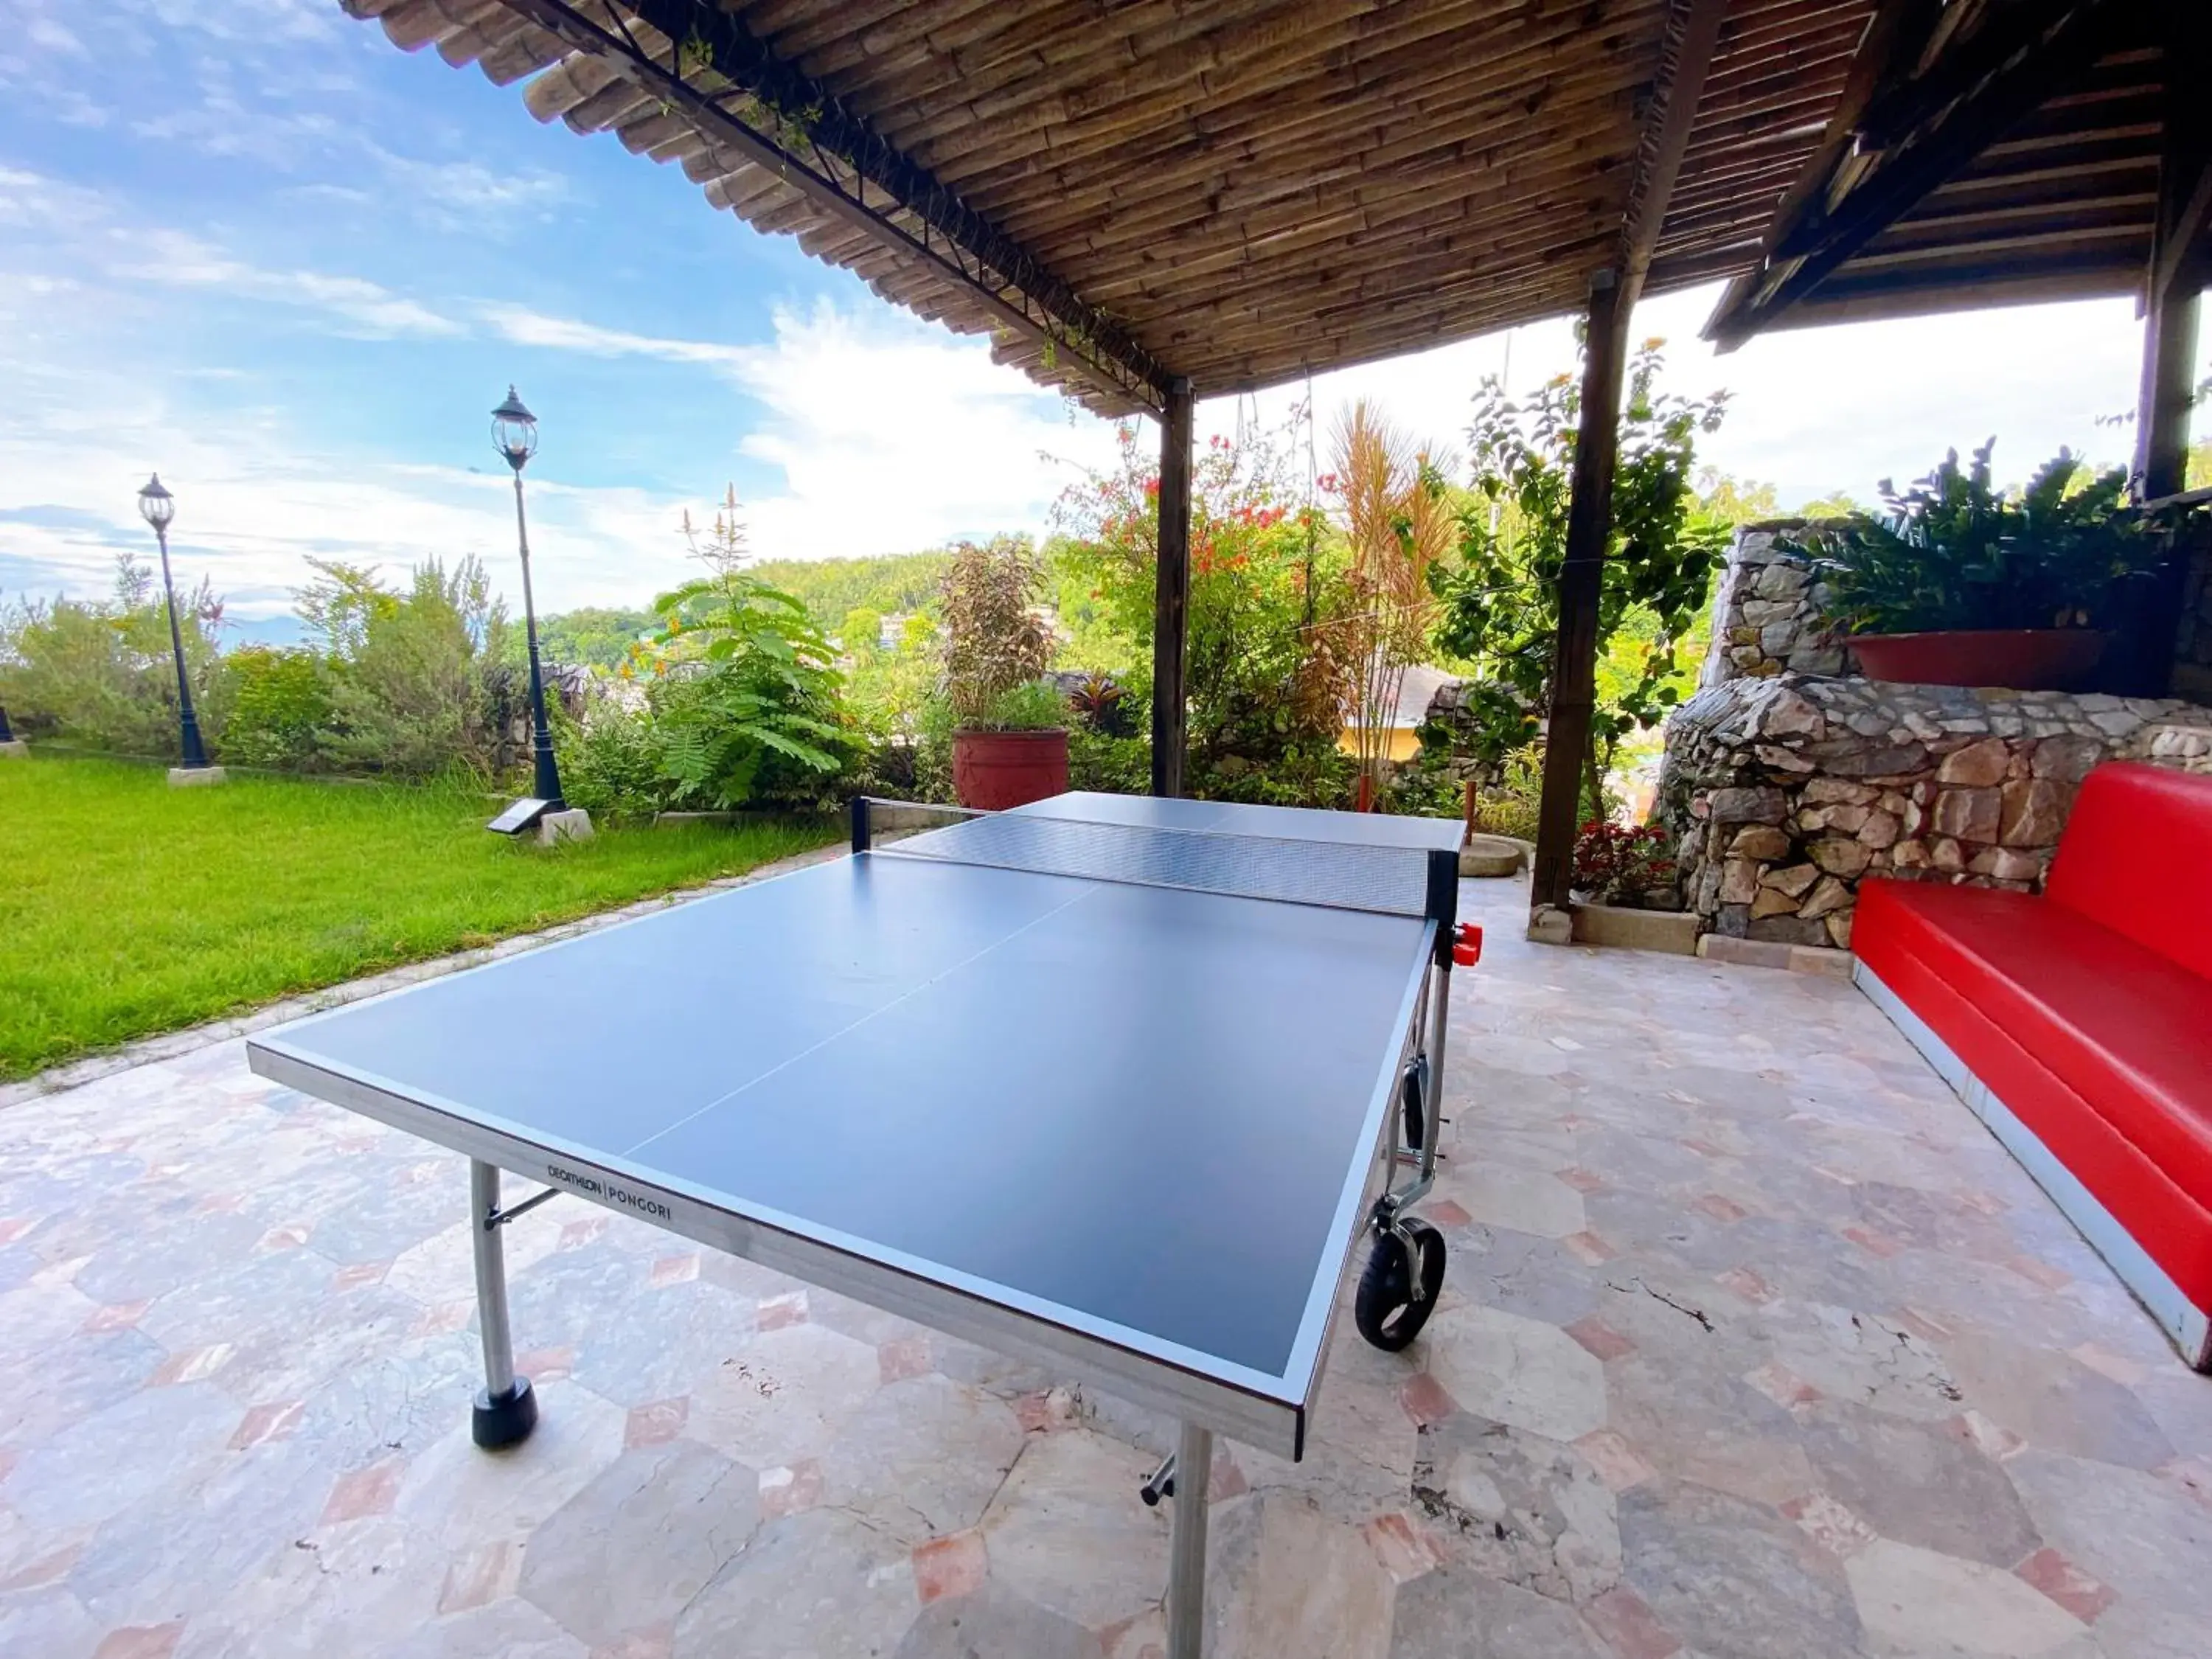 Entertainment, Table Tennis in Tropicana Castle Dive Resort powered by Cocotel